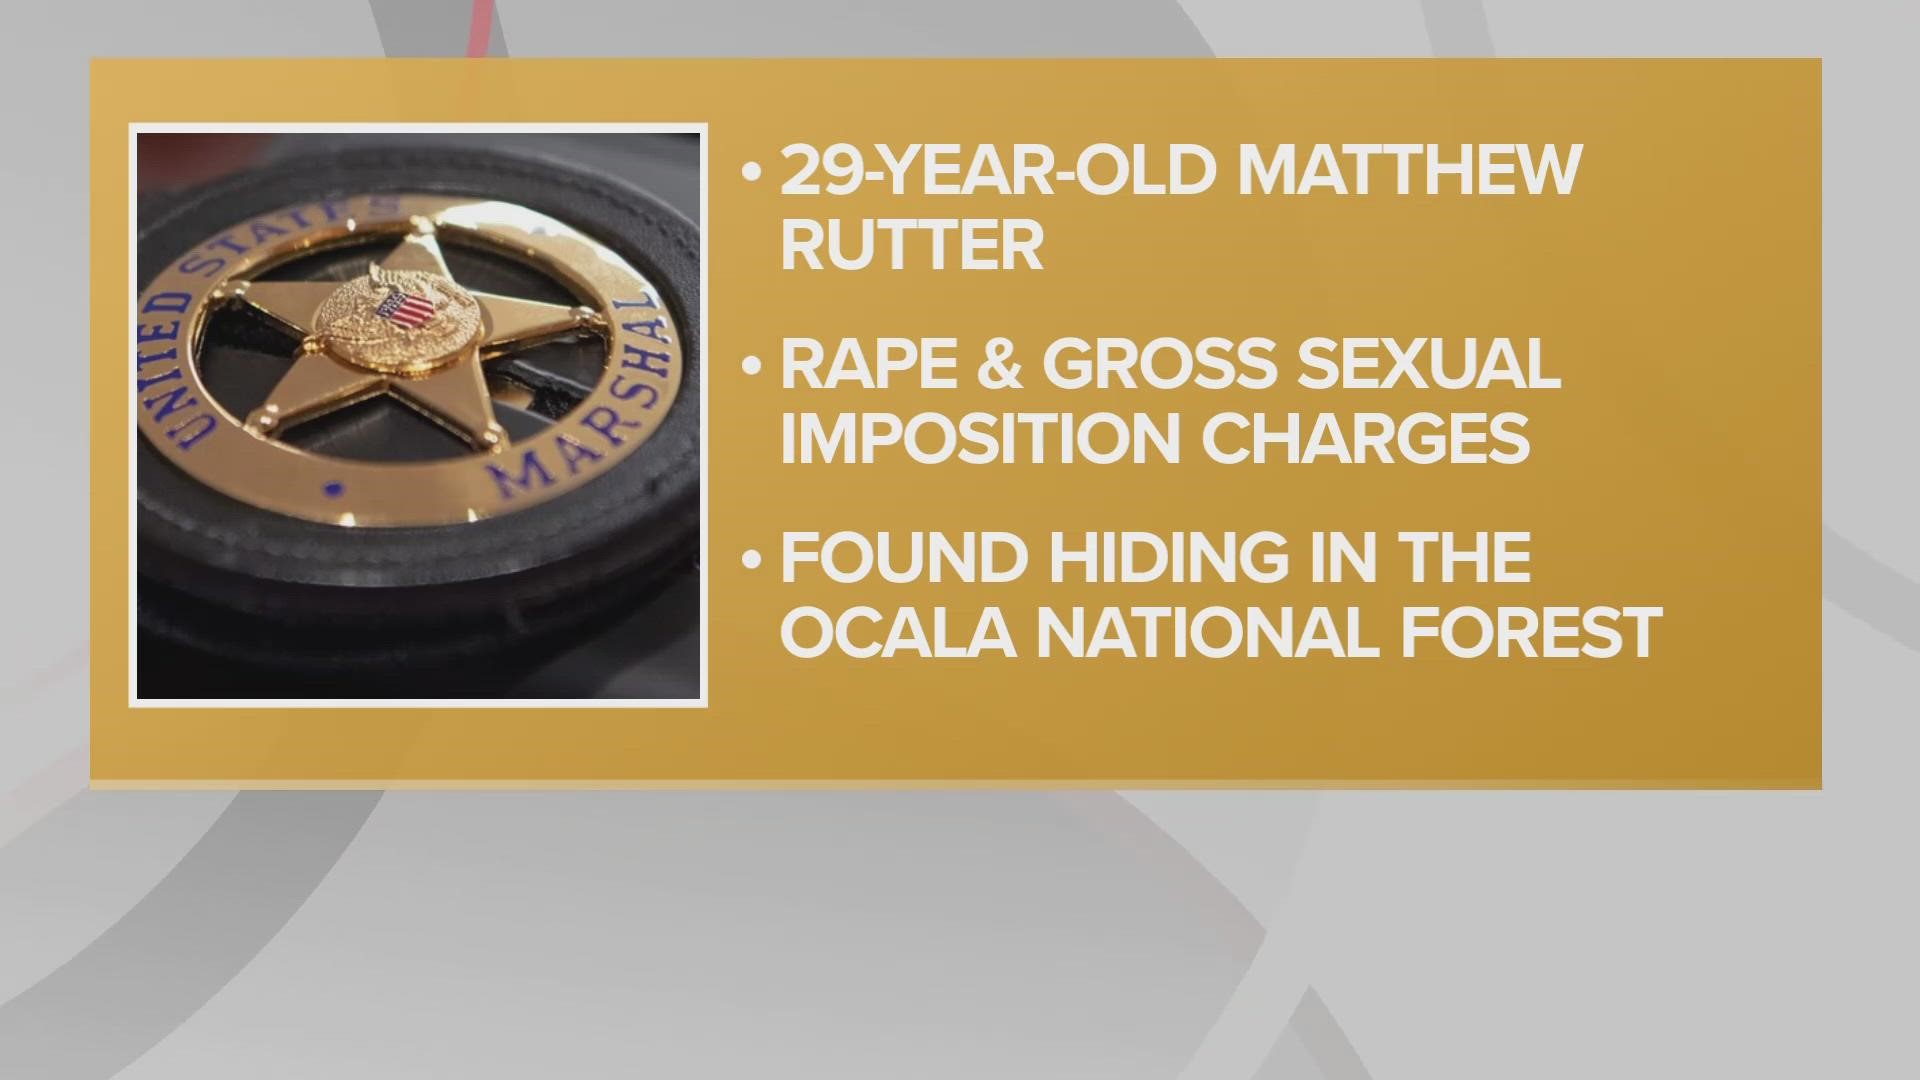 Matthew Rutter is accused of raping a minor and having sexual contact with a minor from January of 2017 through January of 2019.